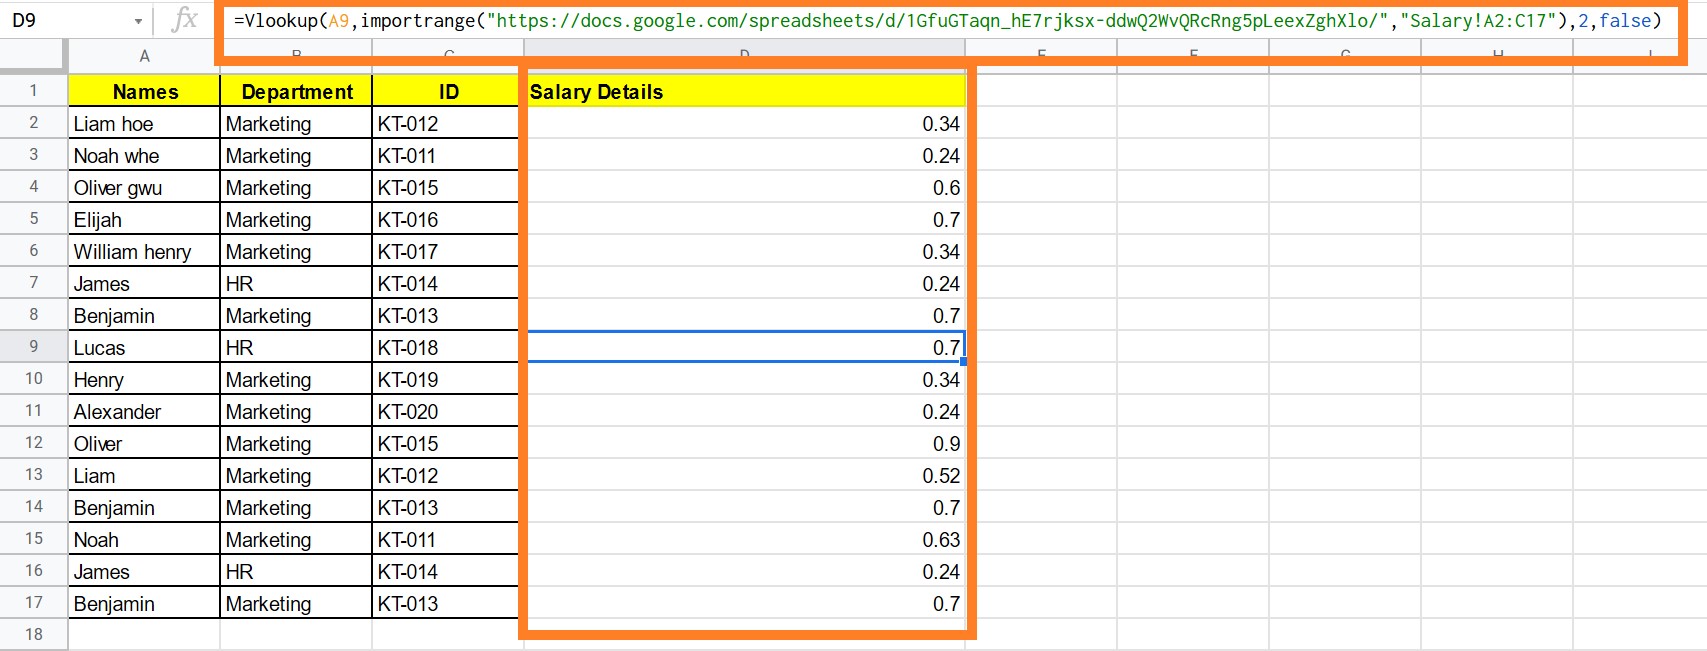 How to VLOOKUP from Another Sheet in Google Sheets